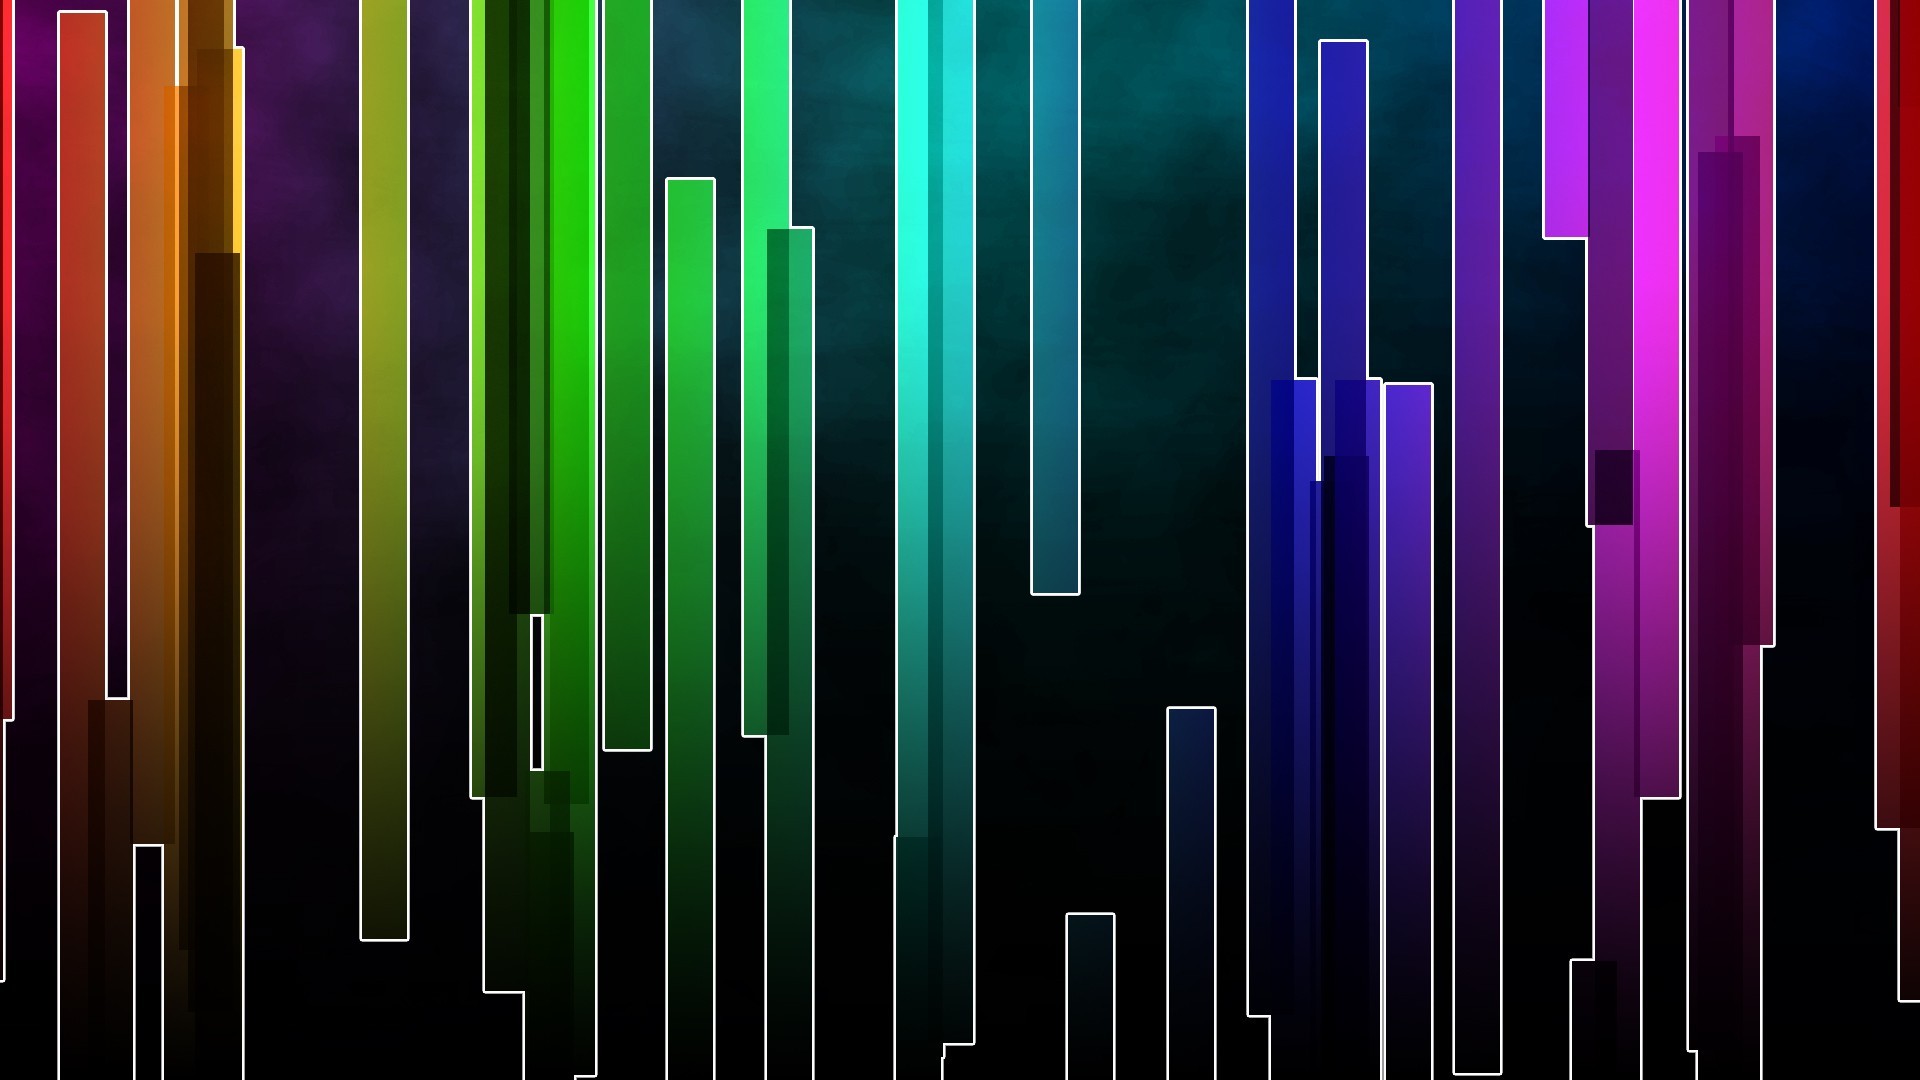 Multicolored Bars Wallpaper - Funky Backgrounds 1920 X 1080 - HD Wallpaper 